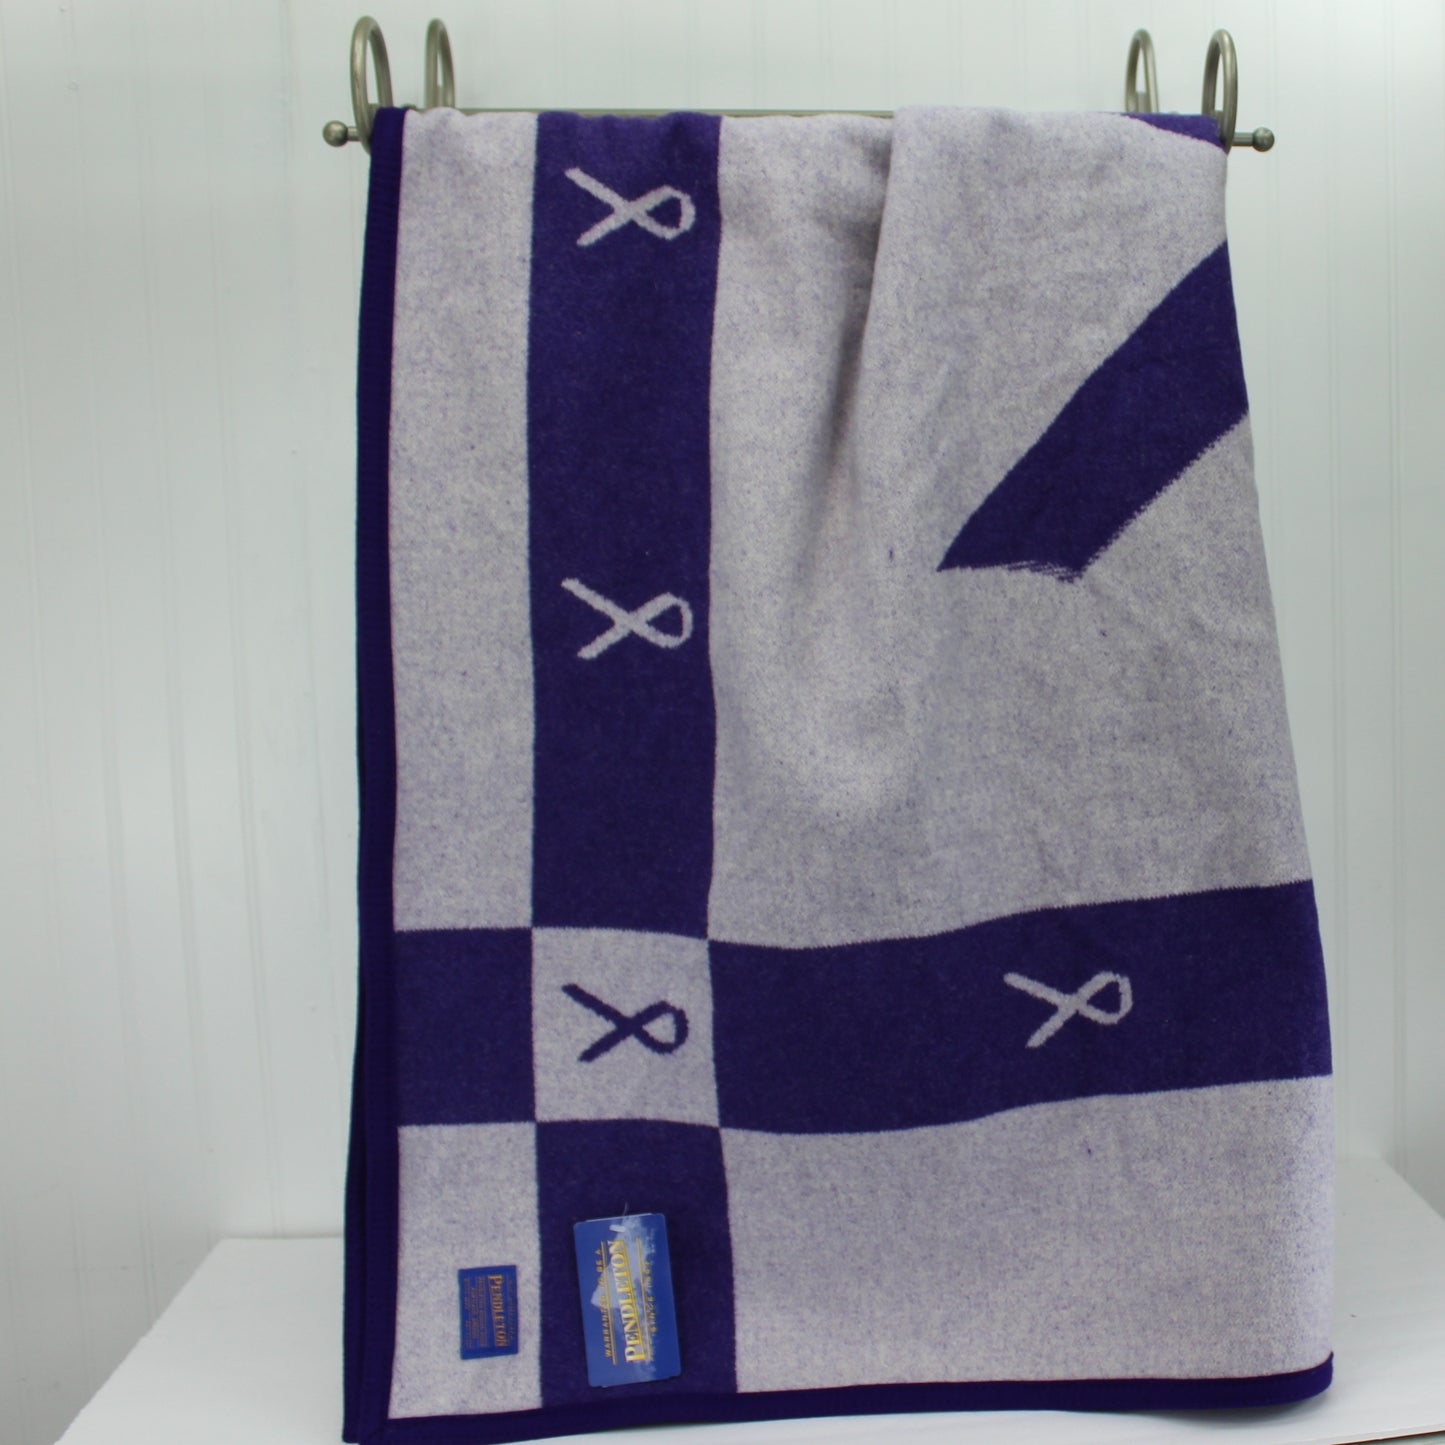 New With Tags Pendleton Wool Cotton Blanket Purple Ribbon Domestic Violence border of ribbons and center large ribbon woven design